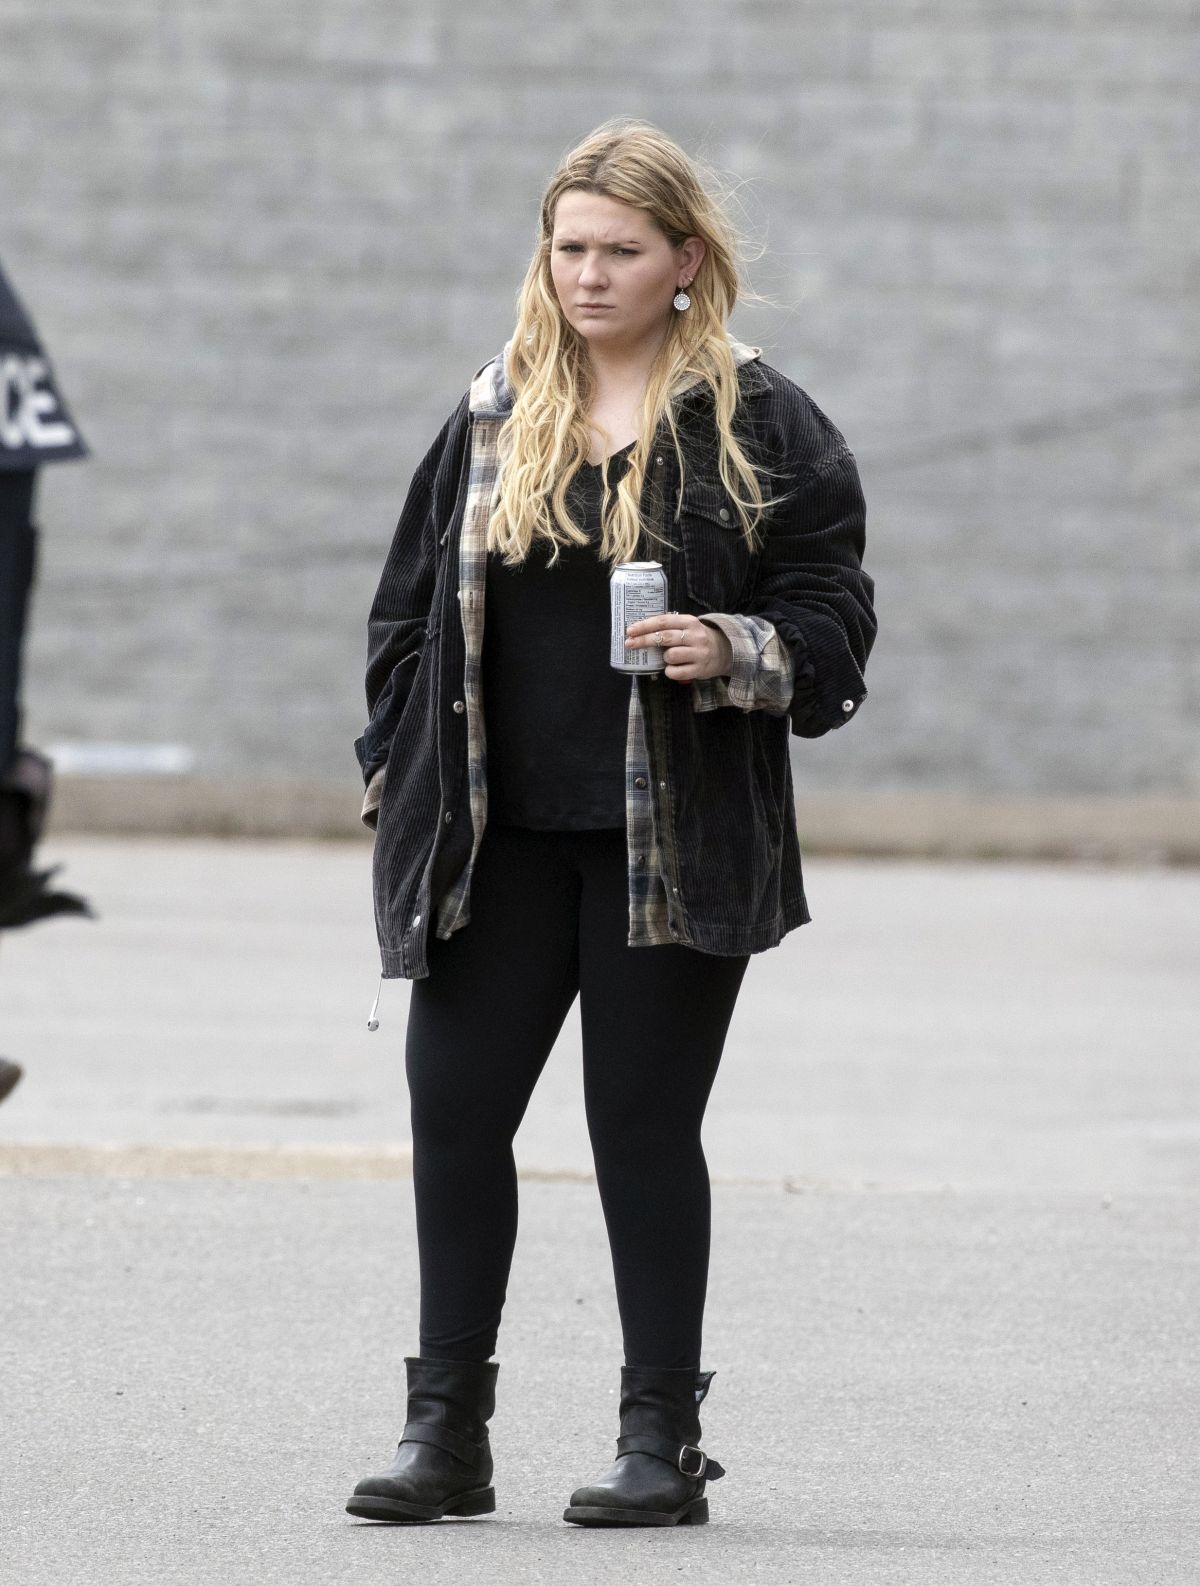 ABIGAIL BRESLIN on the Set of Accused in Toronto 06/03/2022 HawtCelebs